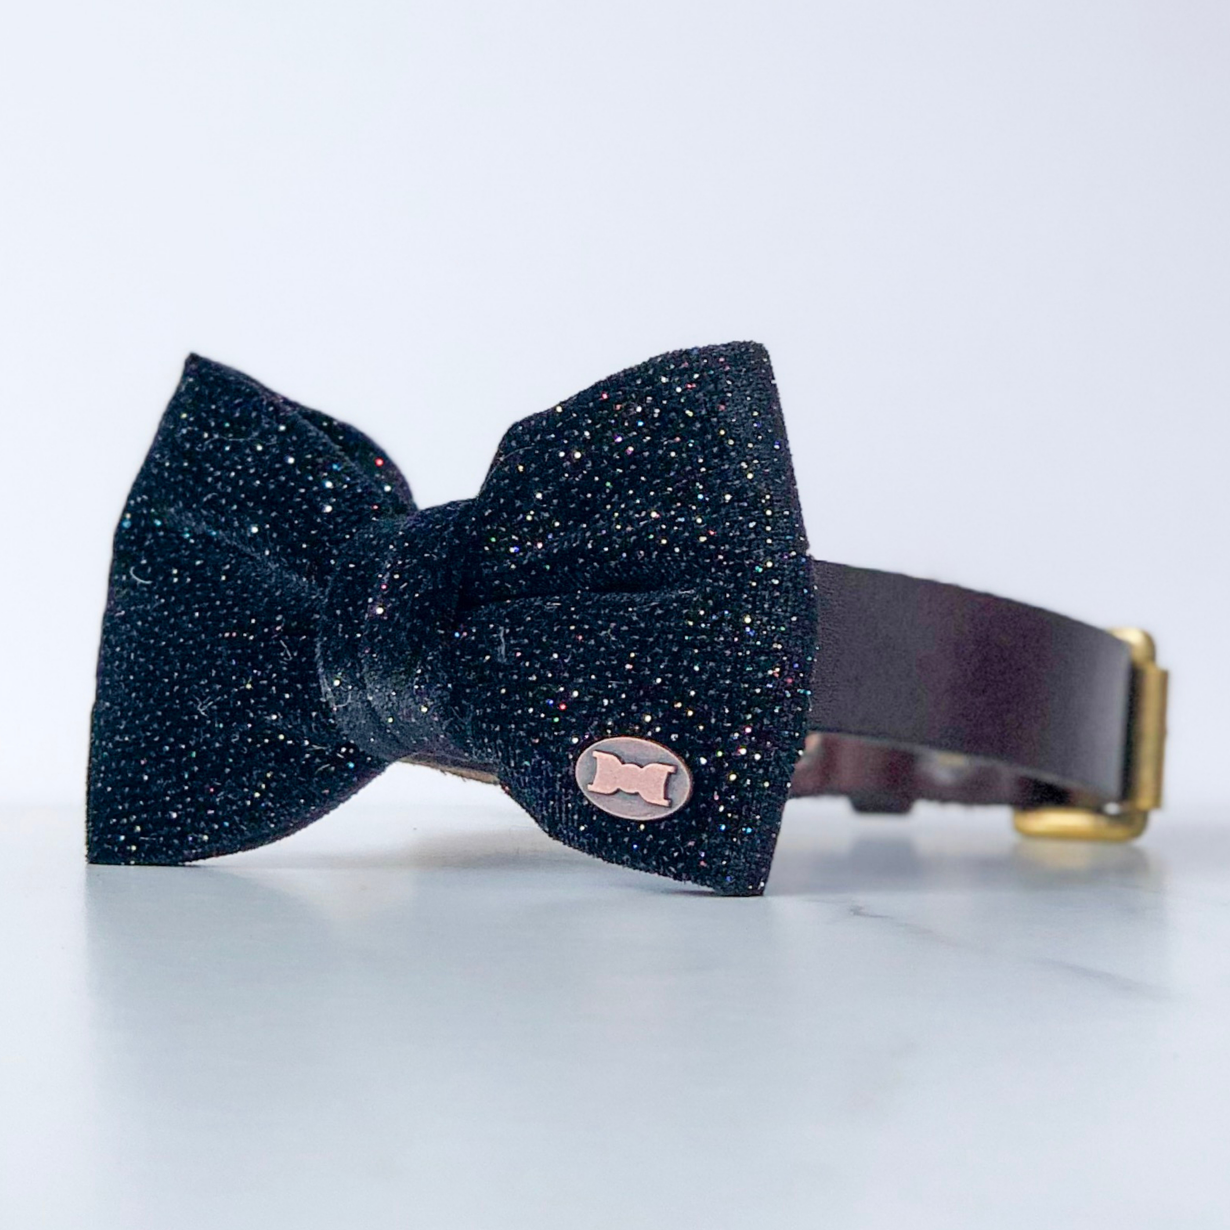 Glitter and velvet dog bow tie in small